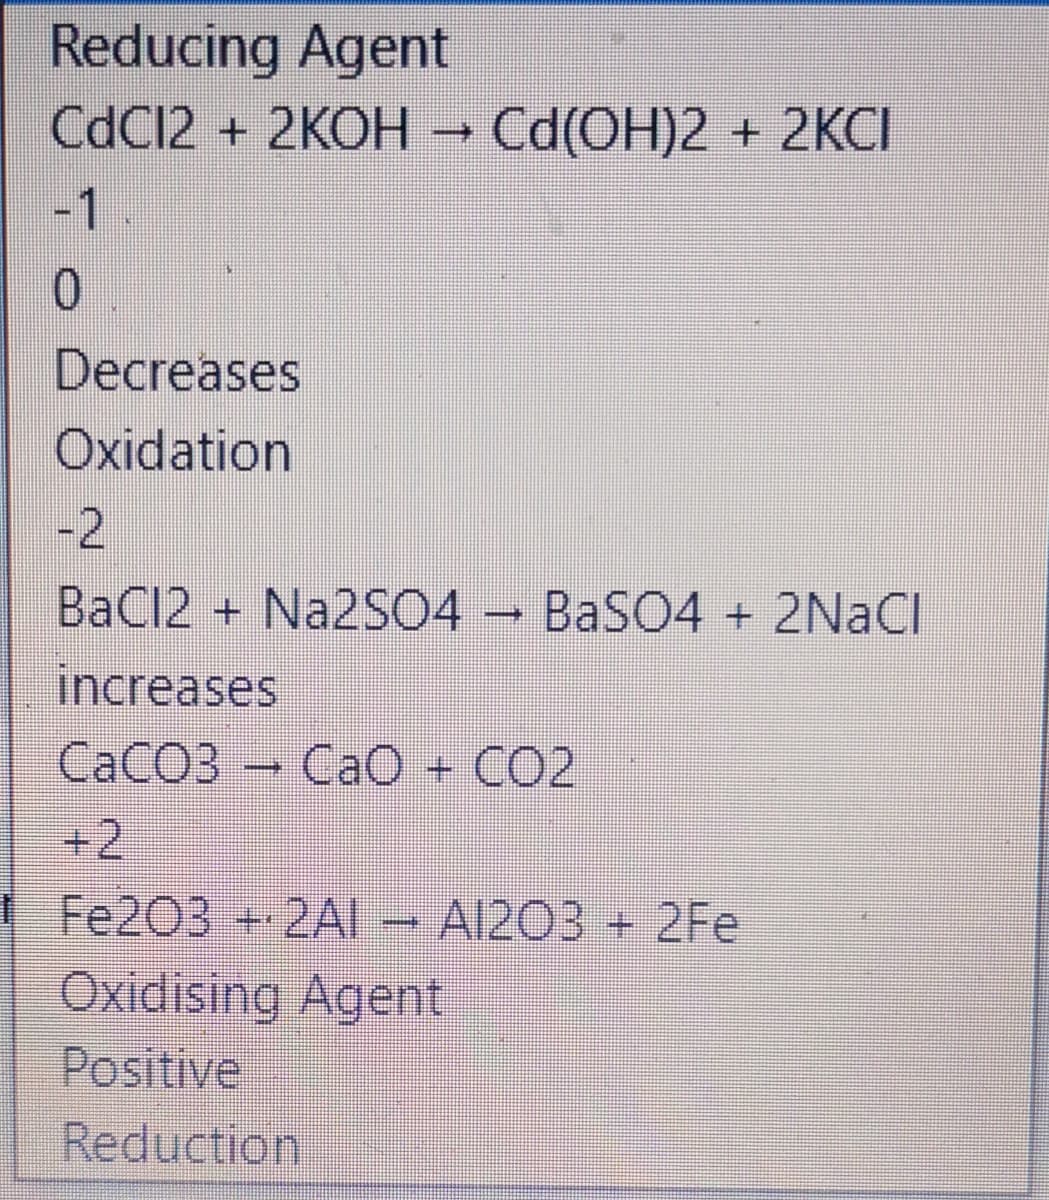 Reducing Agent
CdC12 + 2KOH → Cd(OH)2 + 2KCI
-1
0.
Decreases
Oxidation
-2
BaCl2 + NA2SO4 – BaSO4 + 2NACI
increases
CACO3 Ca0 + CO2
+2
Fe203 +2AI– A1203 + 2Fe
Oxidising Agent
Positive
Reduction
